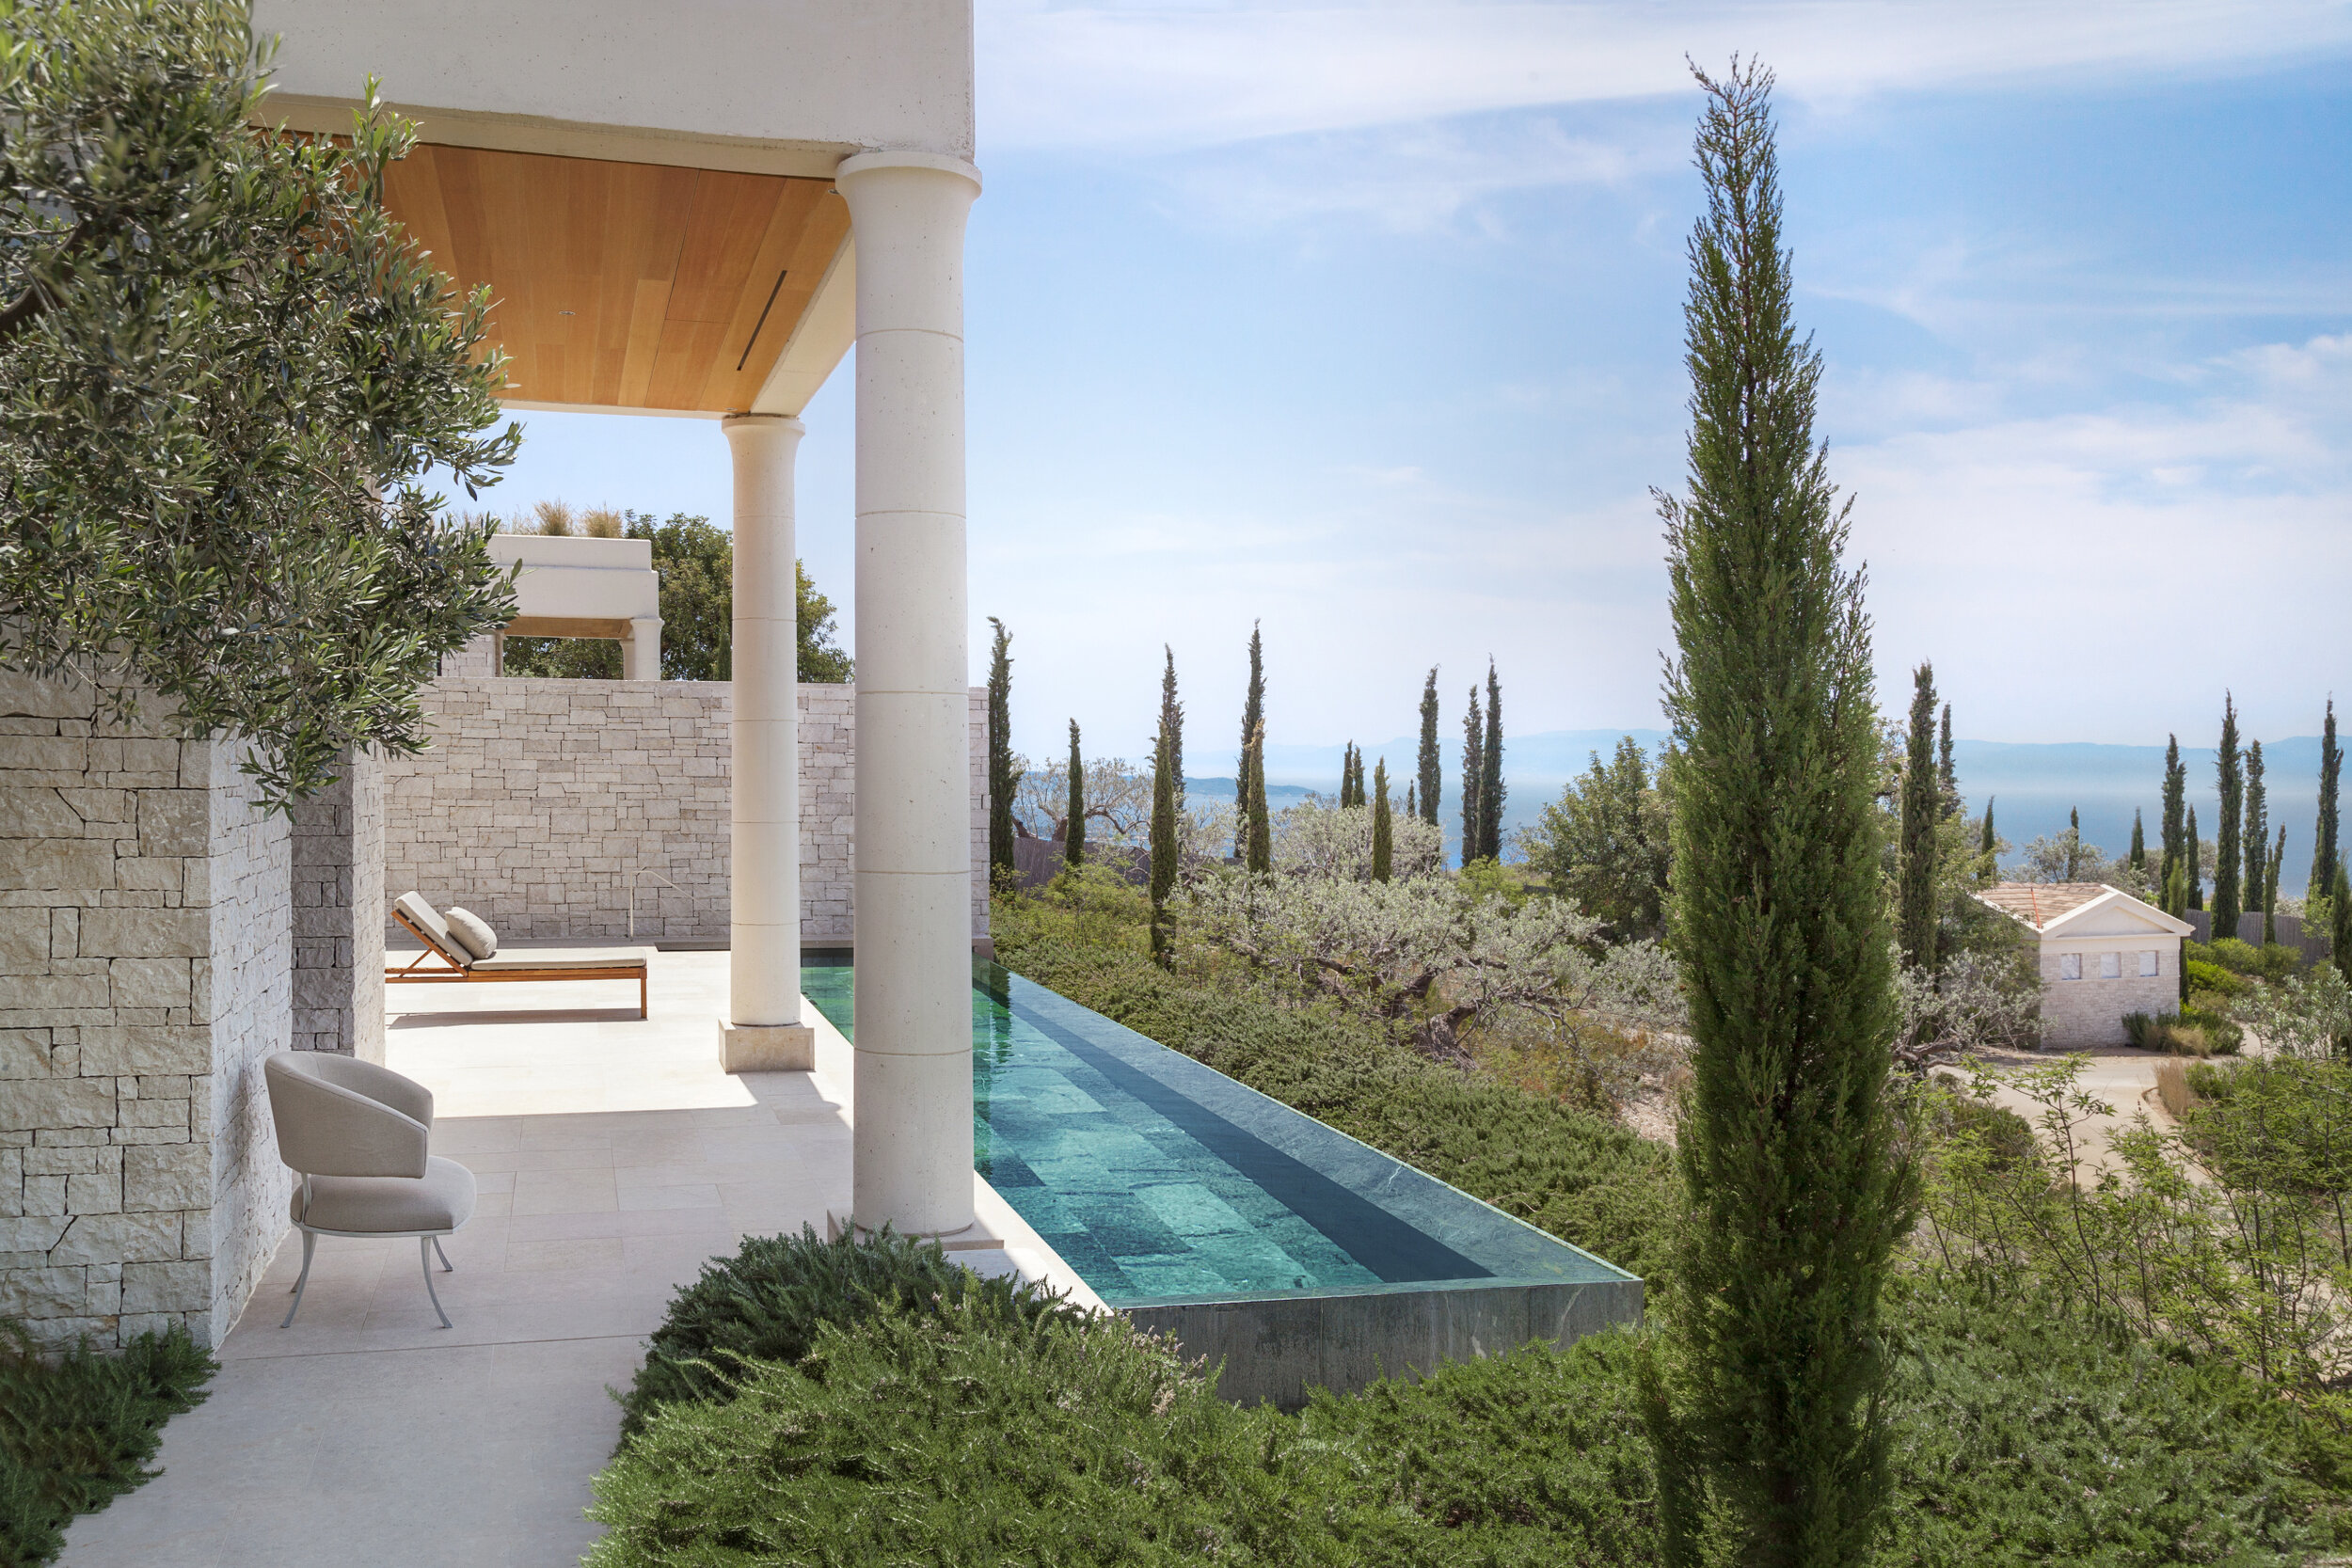 Amanzoe, Greece - Accommodation, Deluxe Pool Pavilion, Pool_High Res_7820.jpg